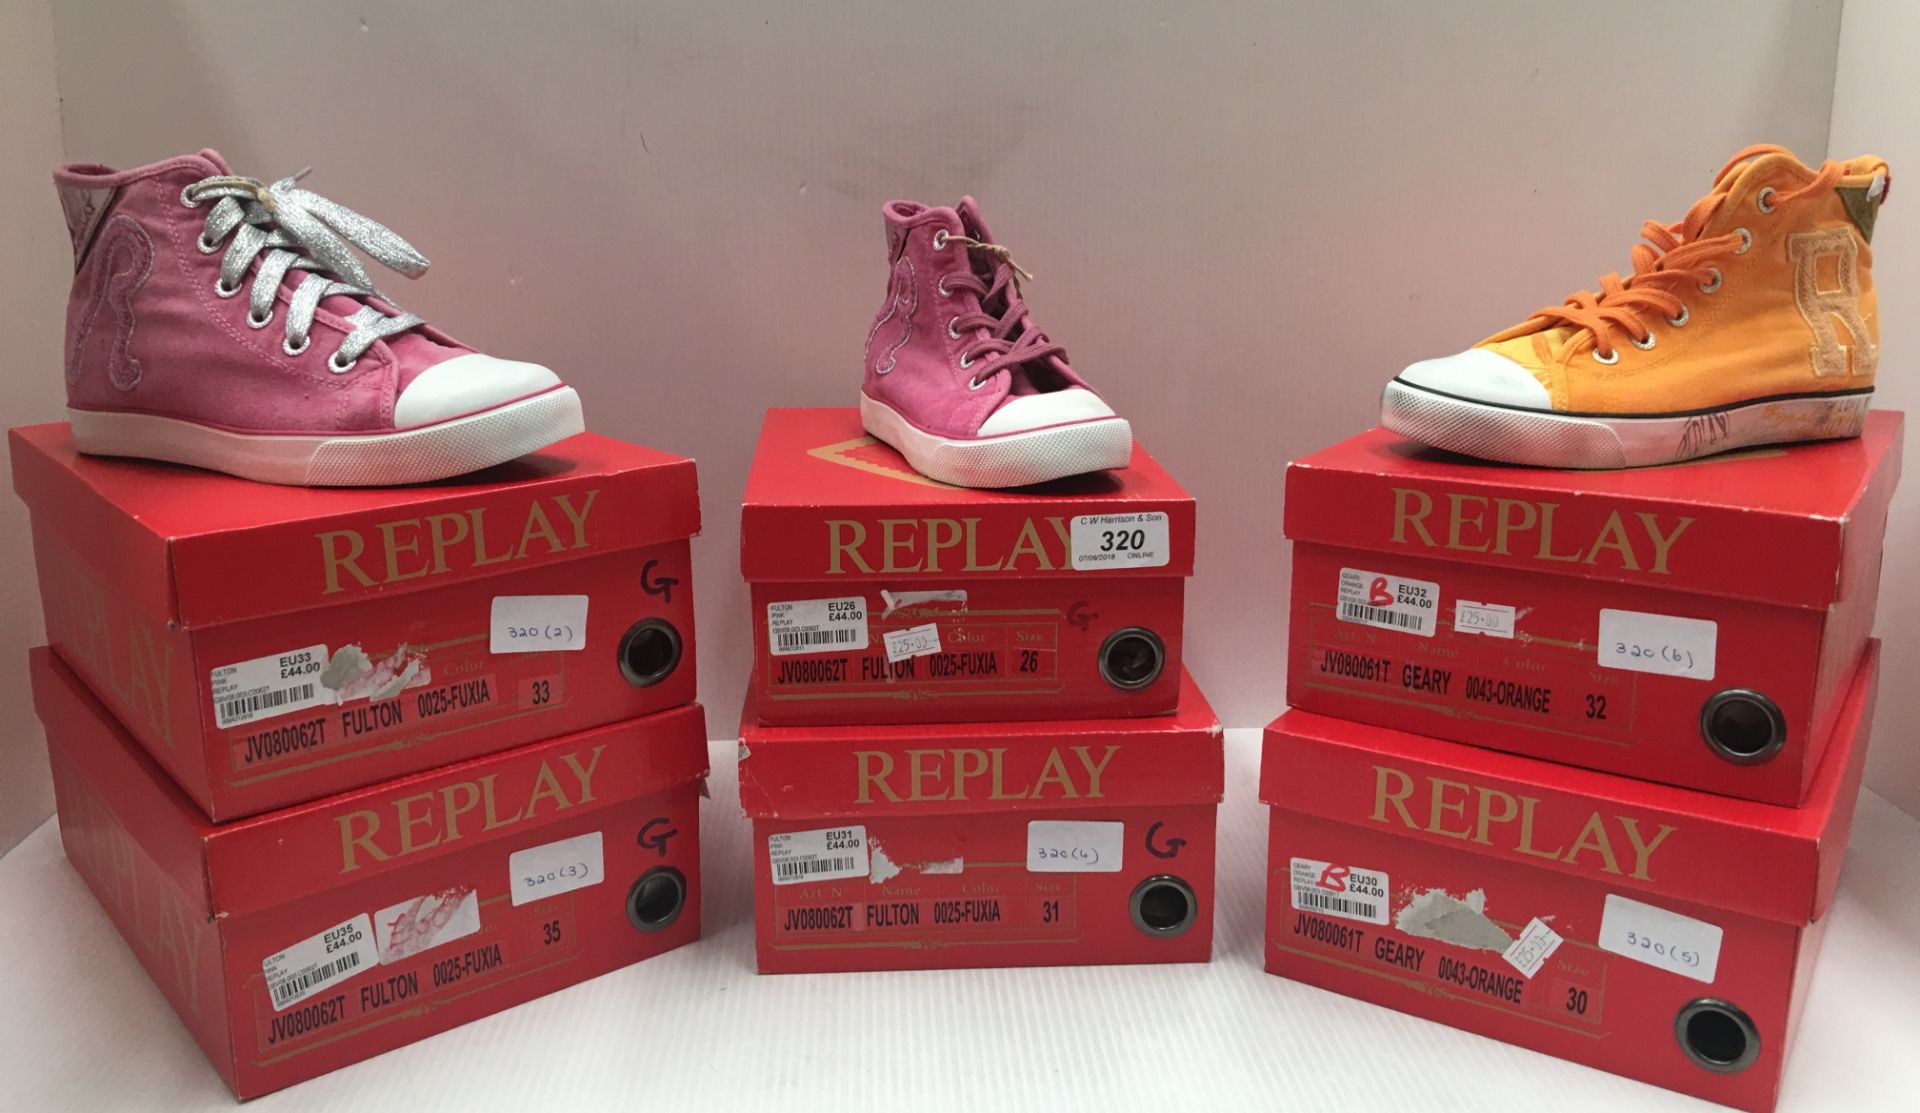 6 x pairs of children's shoes - Replay &